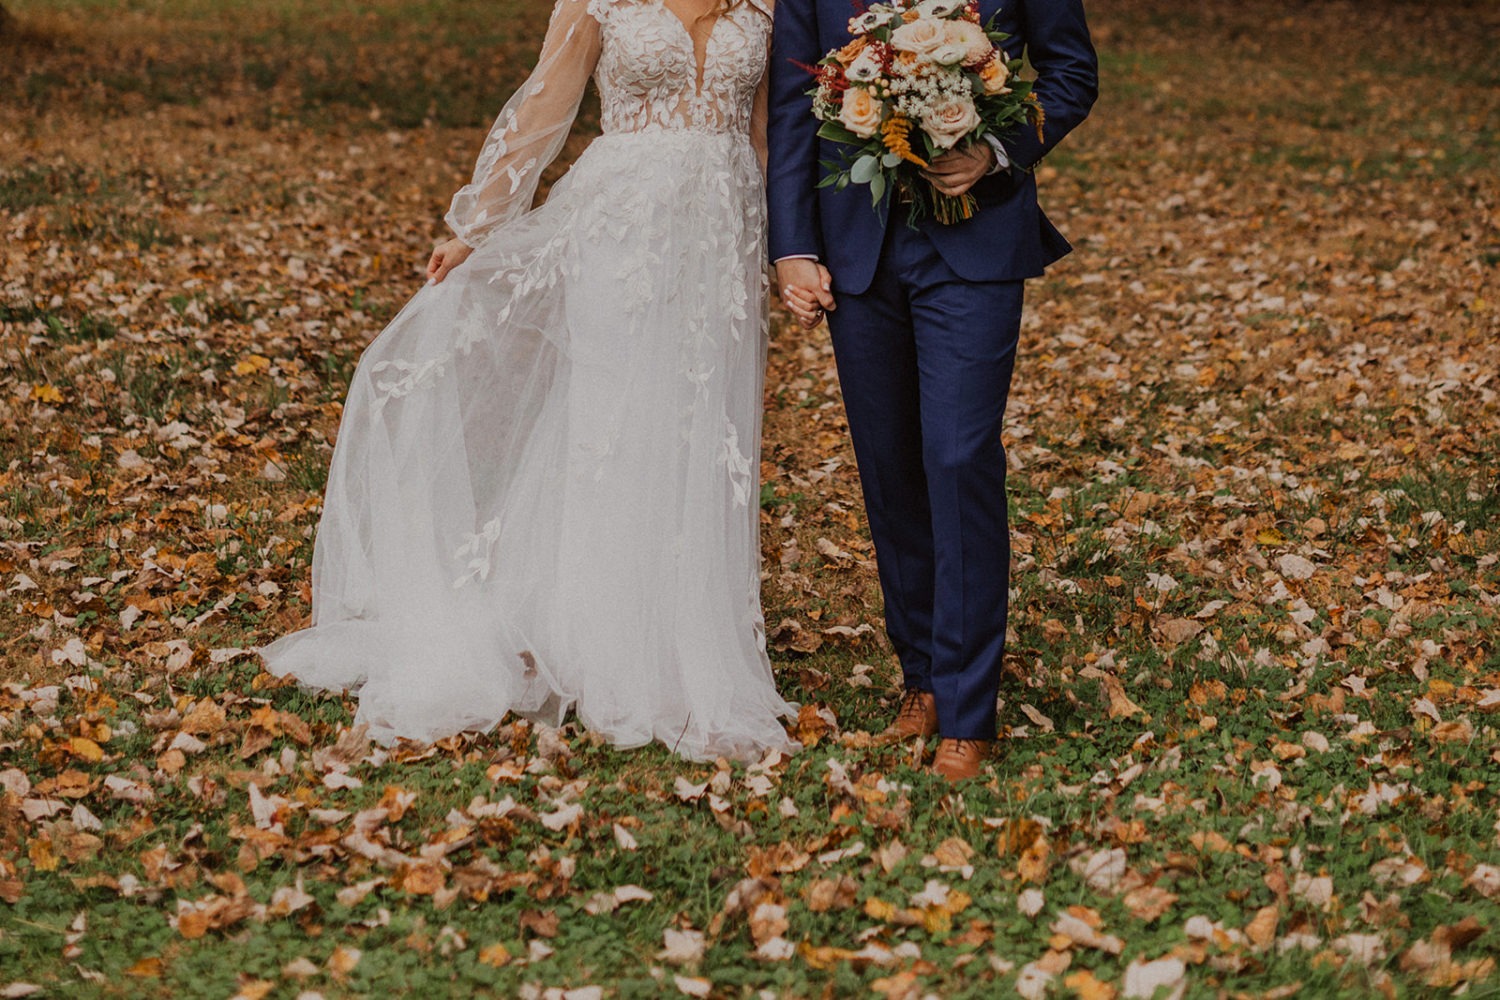 Bride holds dress and groom holds bouquet at fall leaves wedding